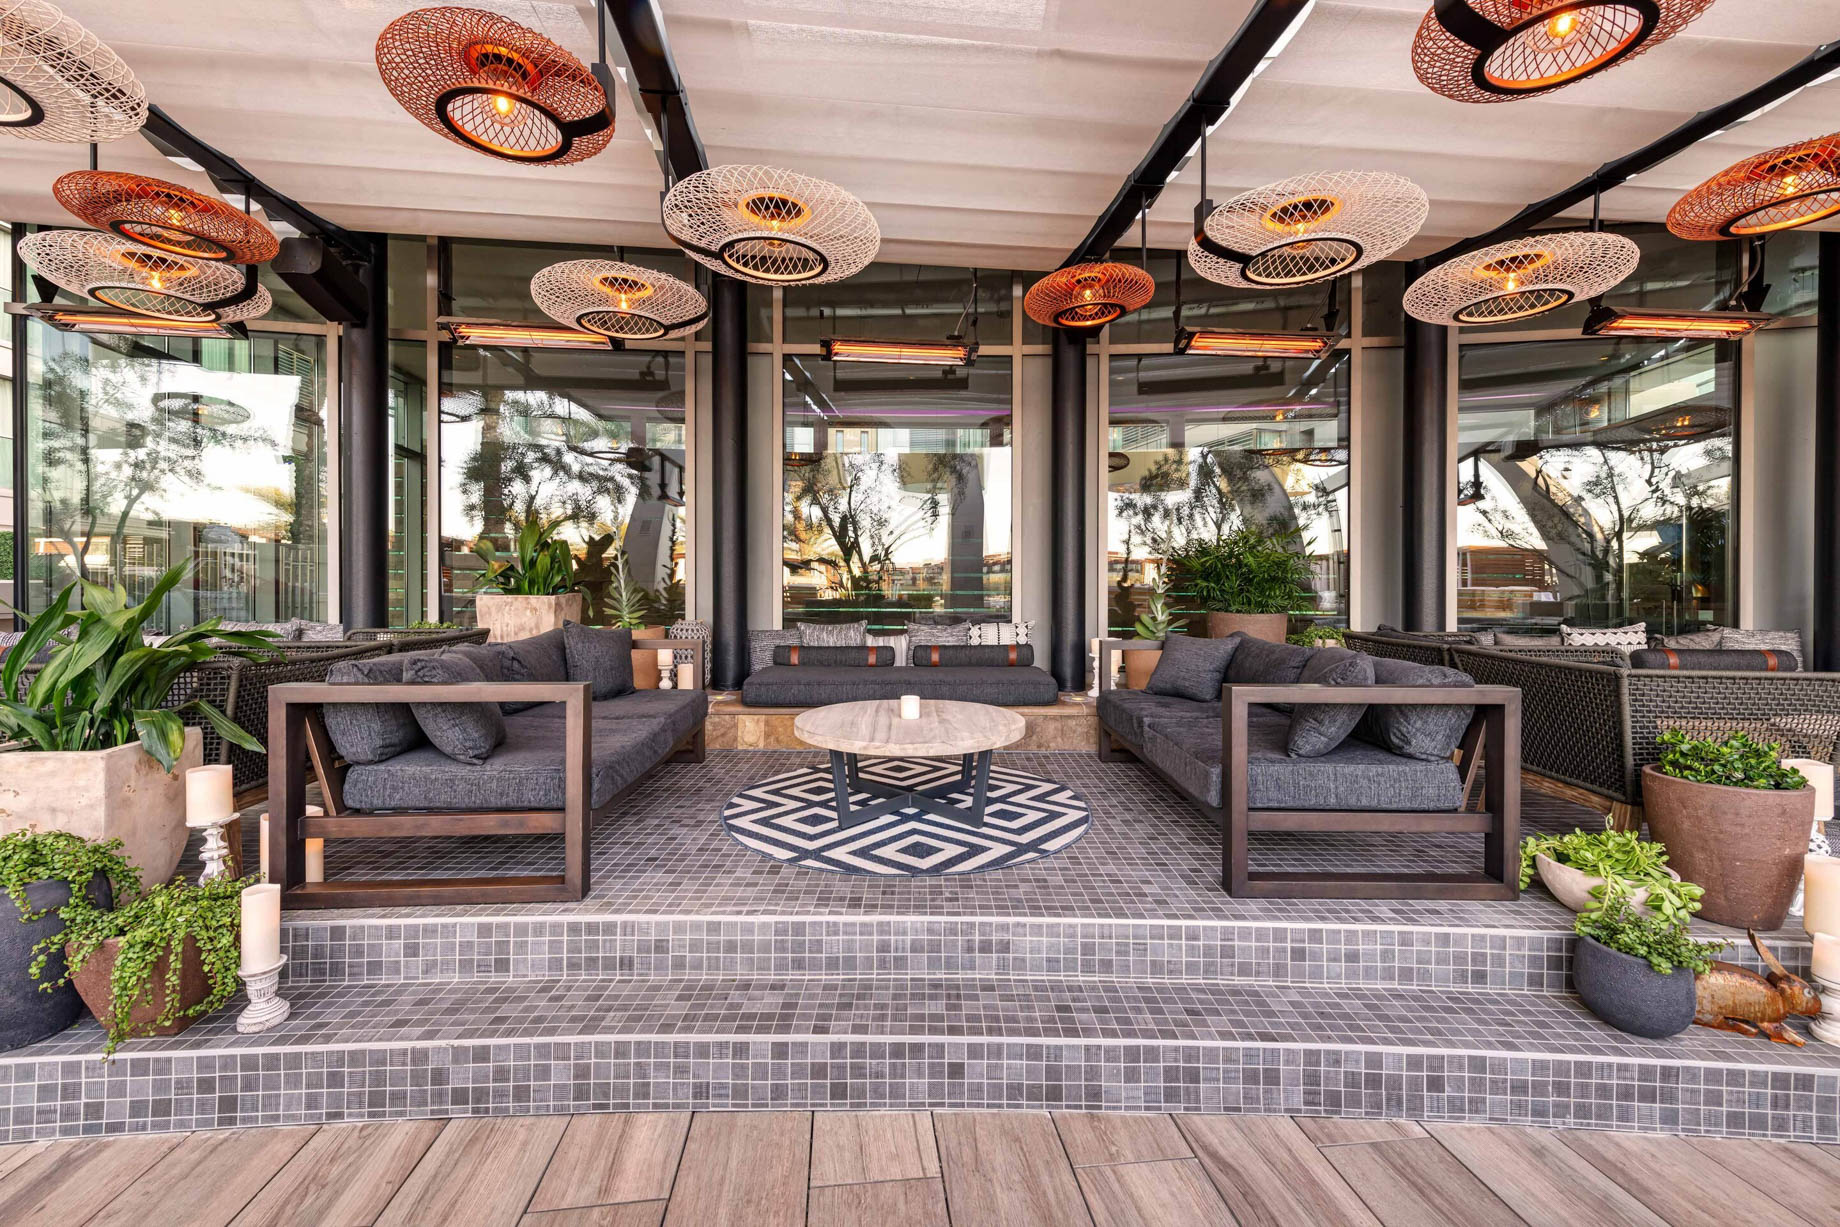 W Scottsdale Hotel – Scottsdale, AZ, USA – Cottontail Cafe and Lounge Exterior Seating